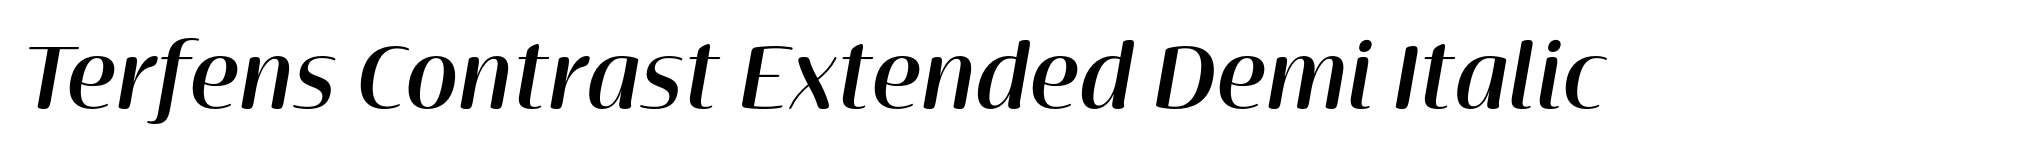 Terfens Contrast Extended Demi Italic image